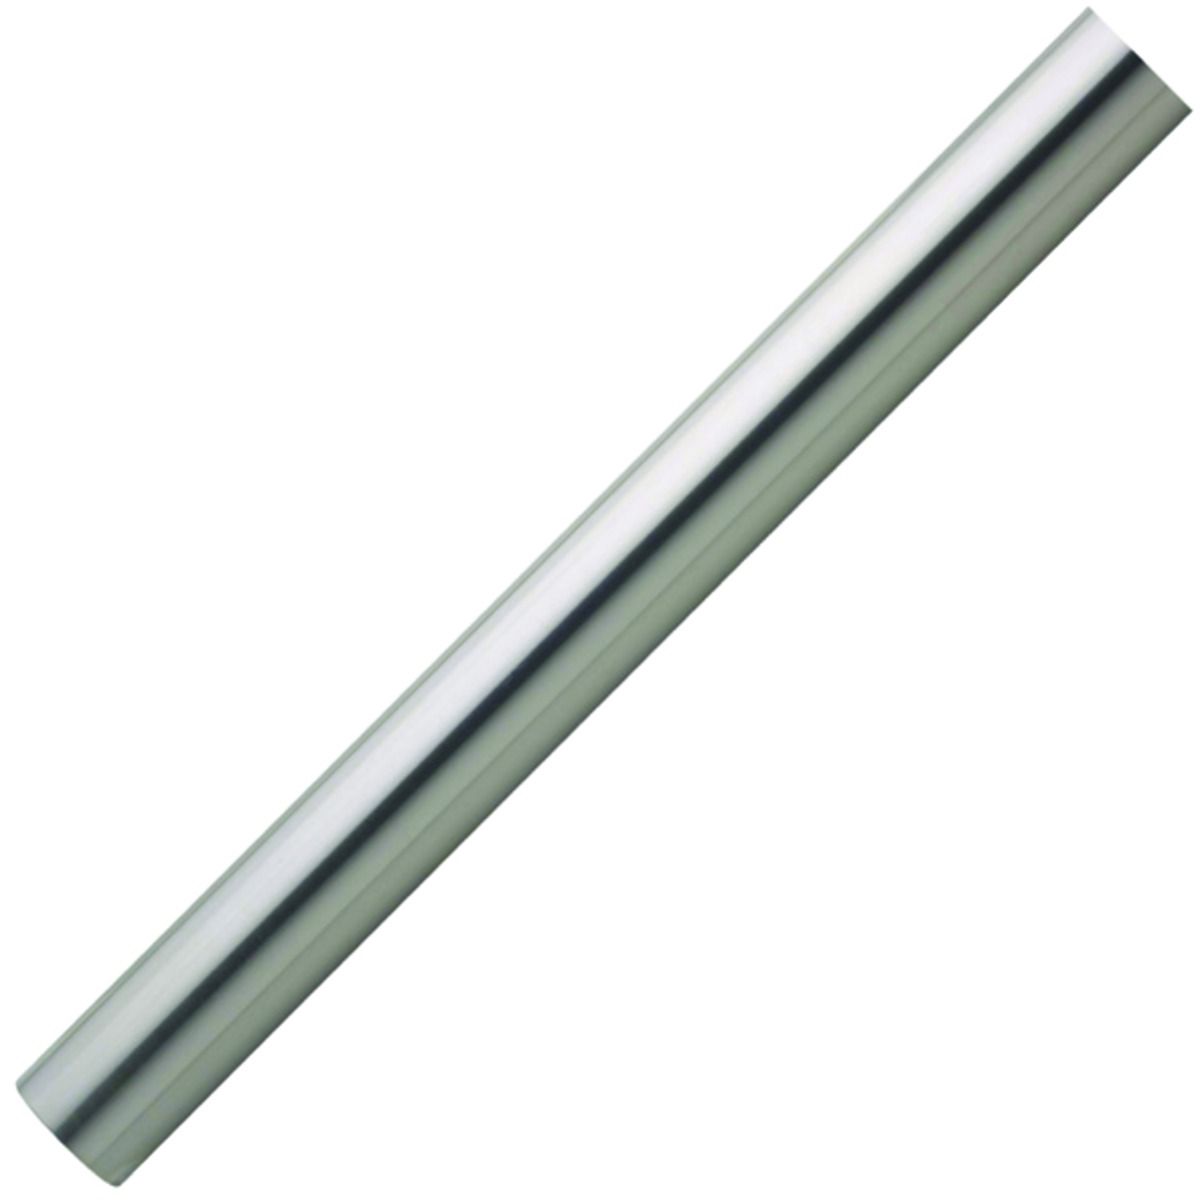 Image of Wickes Brushed Finish Handrail - 40mm x 2.4m